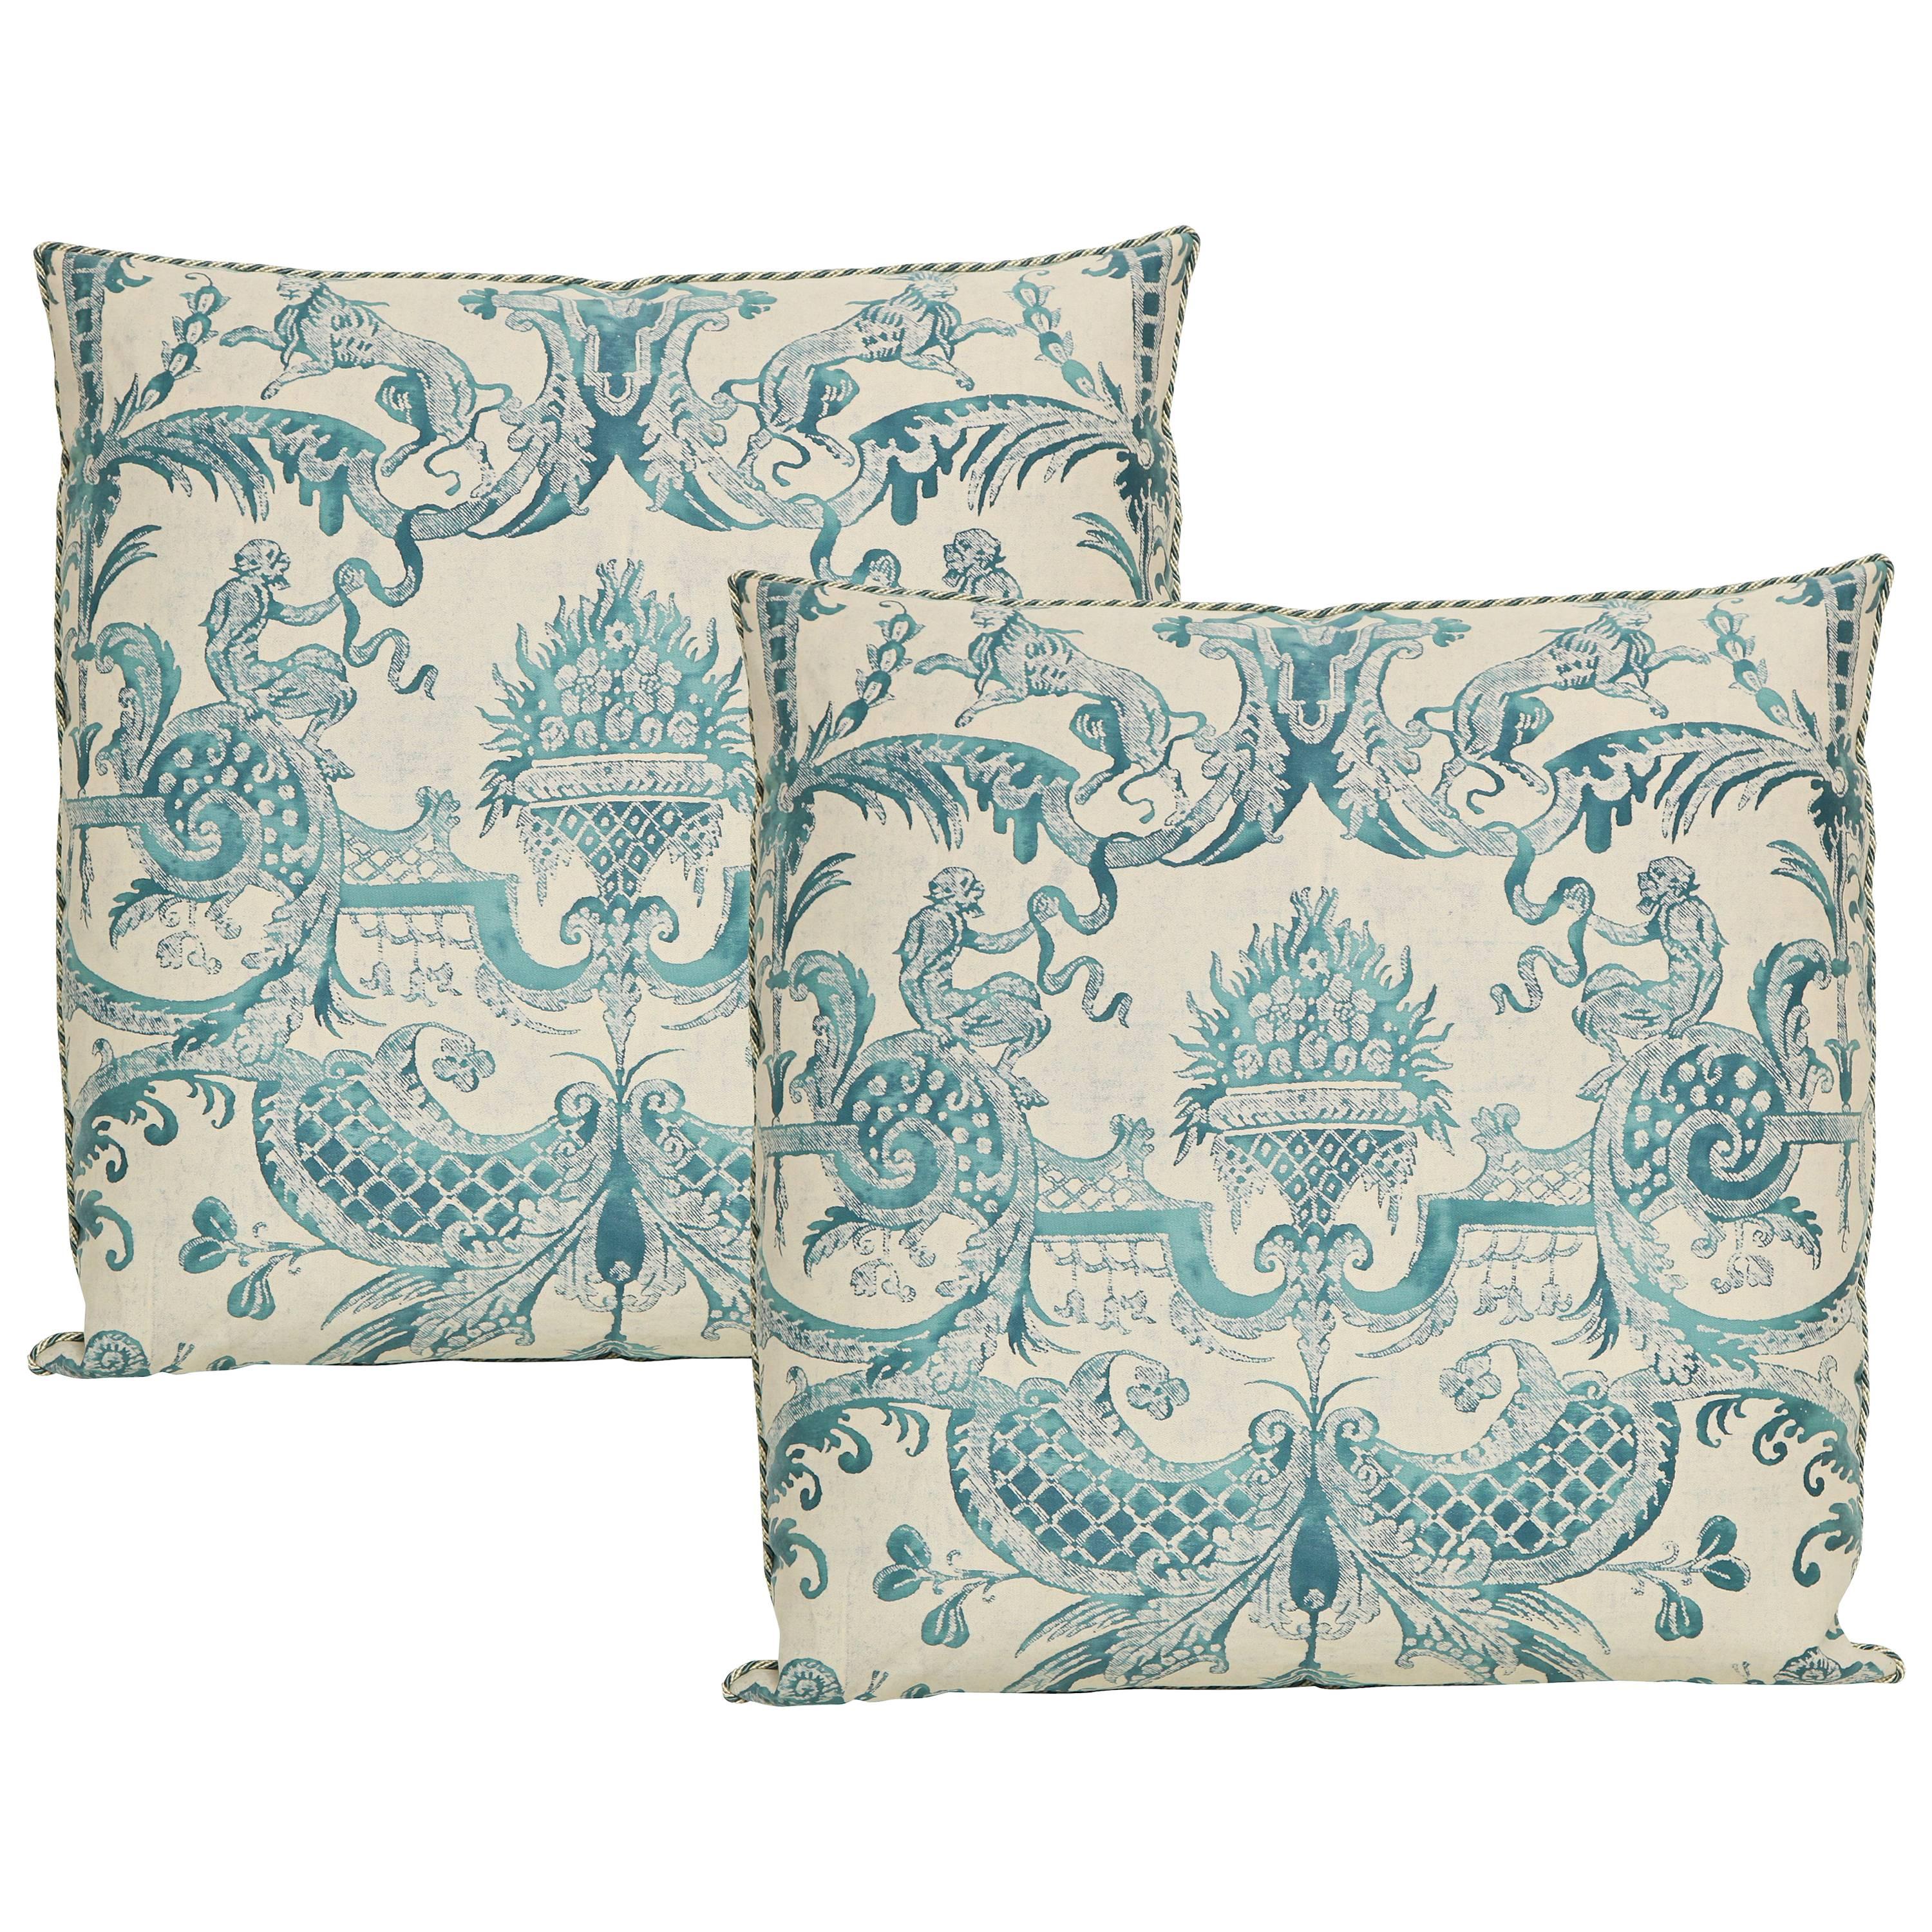 Pair of Fortuny Fabric Cushions in the Mazzarino Print